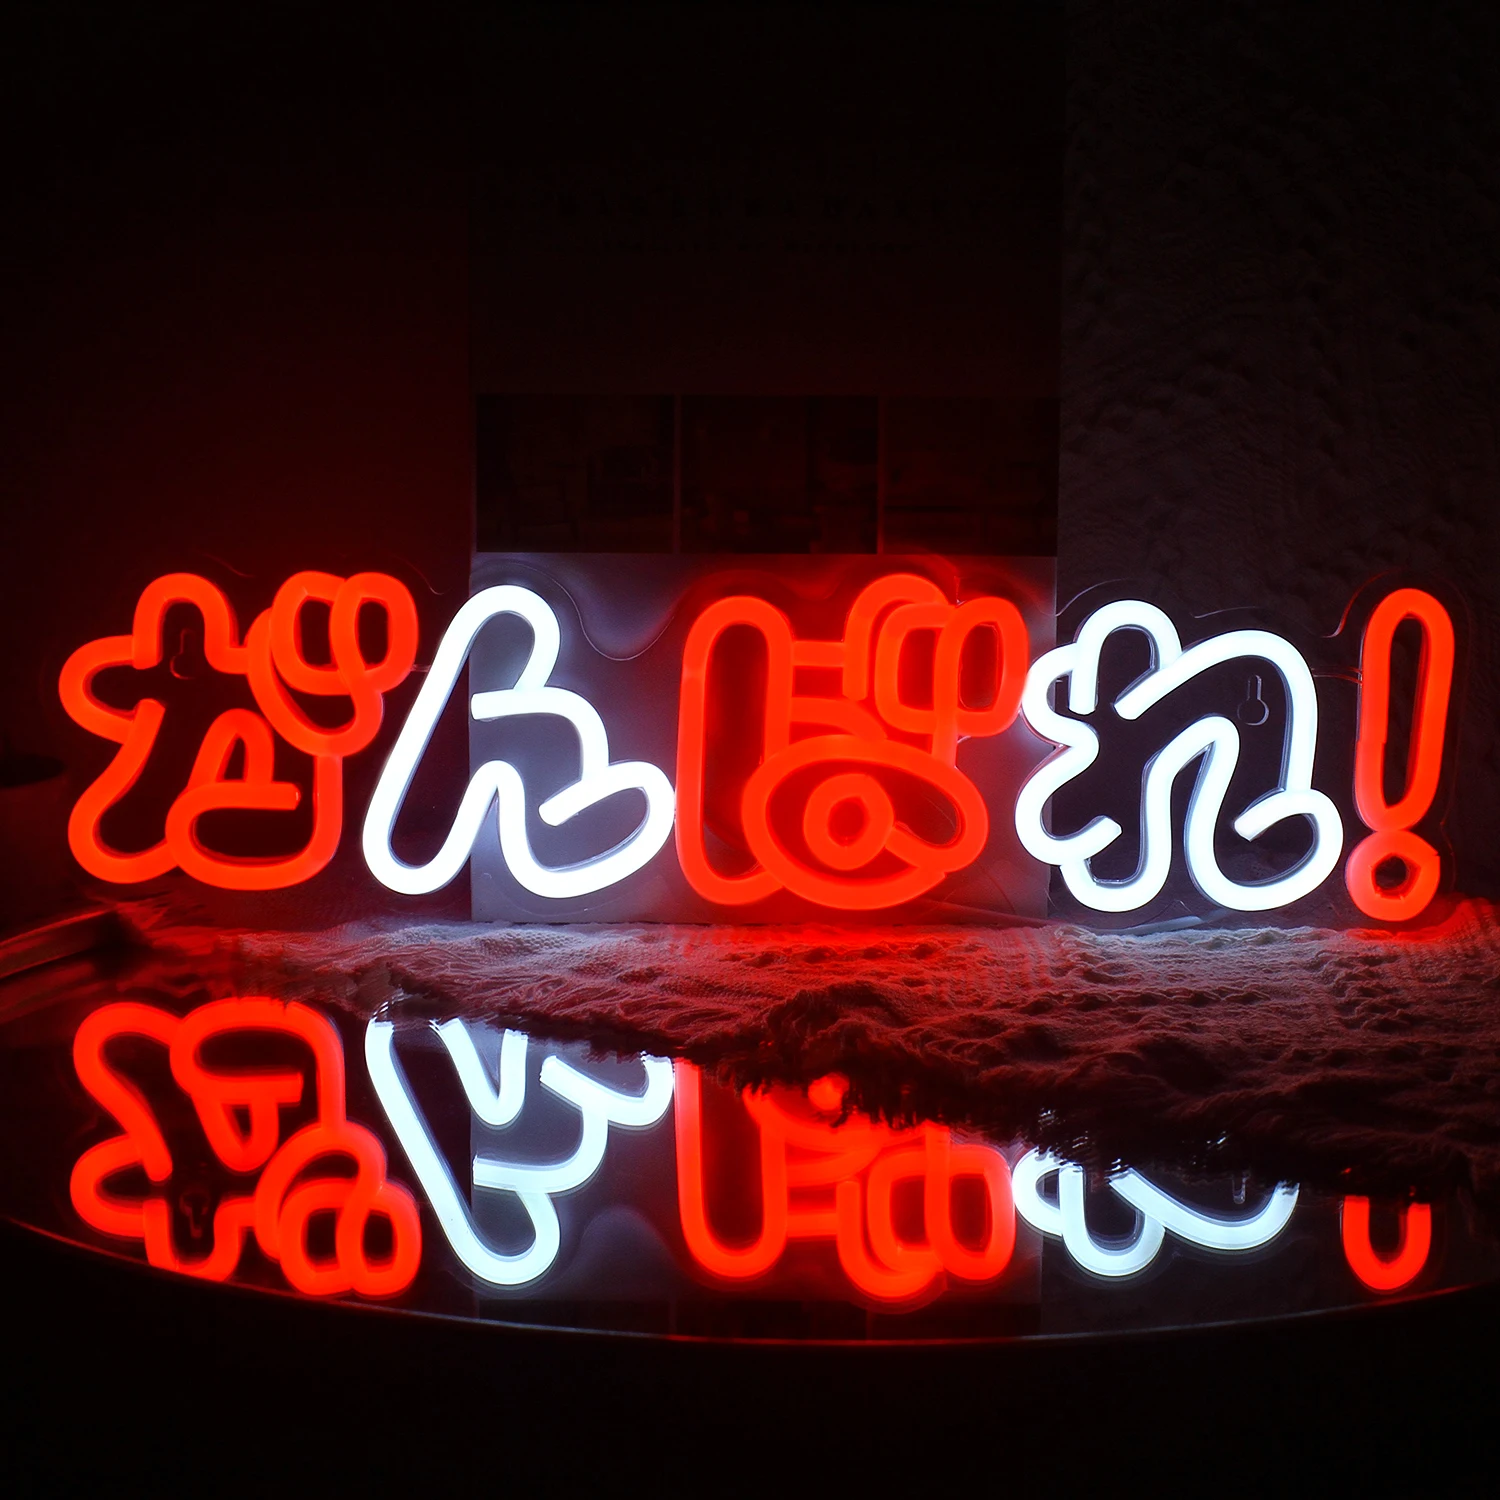 Come On Neon Sign Wall Decor For Office Home Room Store Gym Studio Party Girl's Bedroom LED Neon Light Decoration USB Powered